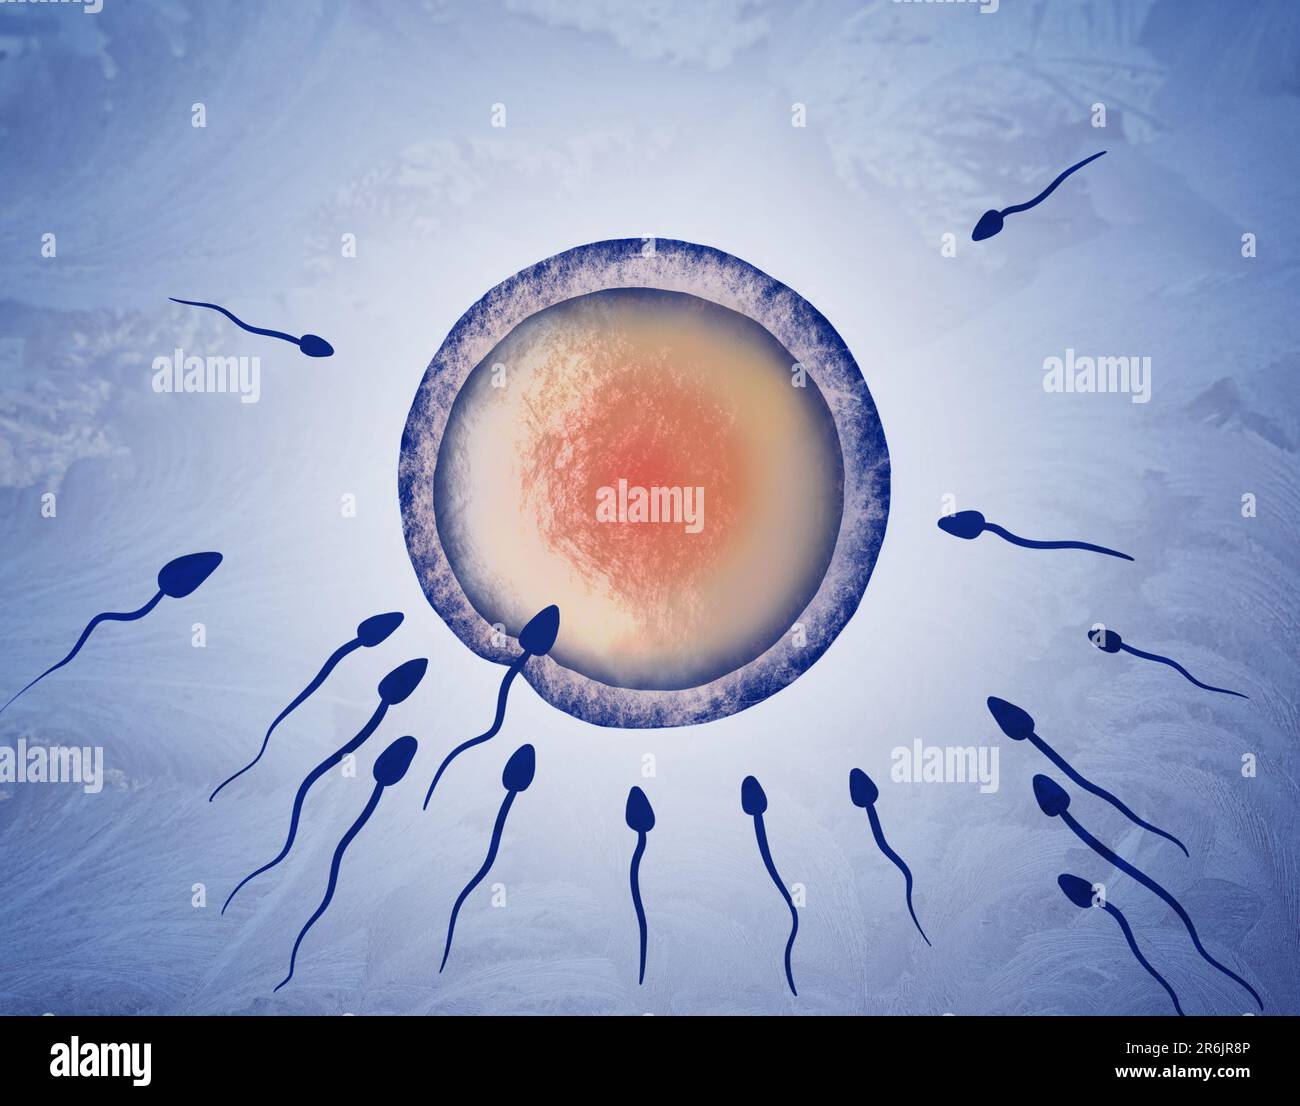 Cryopreservation of genetic material. Sperm cells and ovum on blue background, frost effect Stock Photo